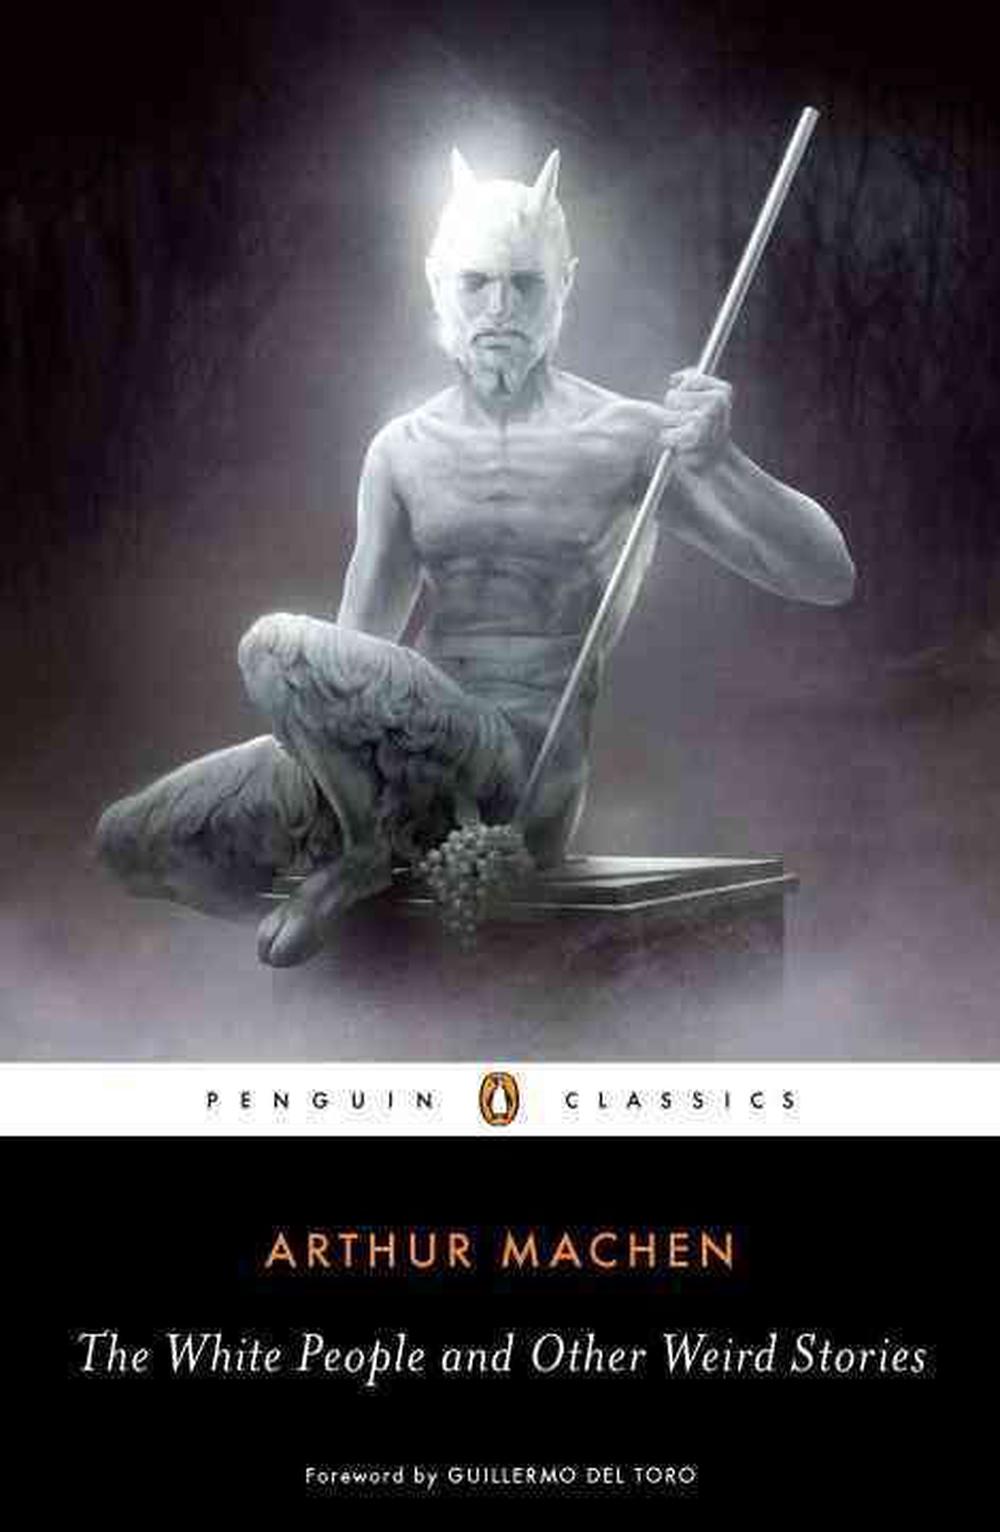 The White People and Other Weird Stories by Arthur Machen